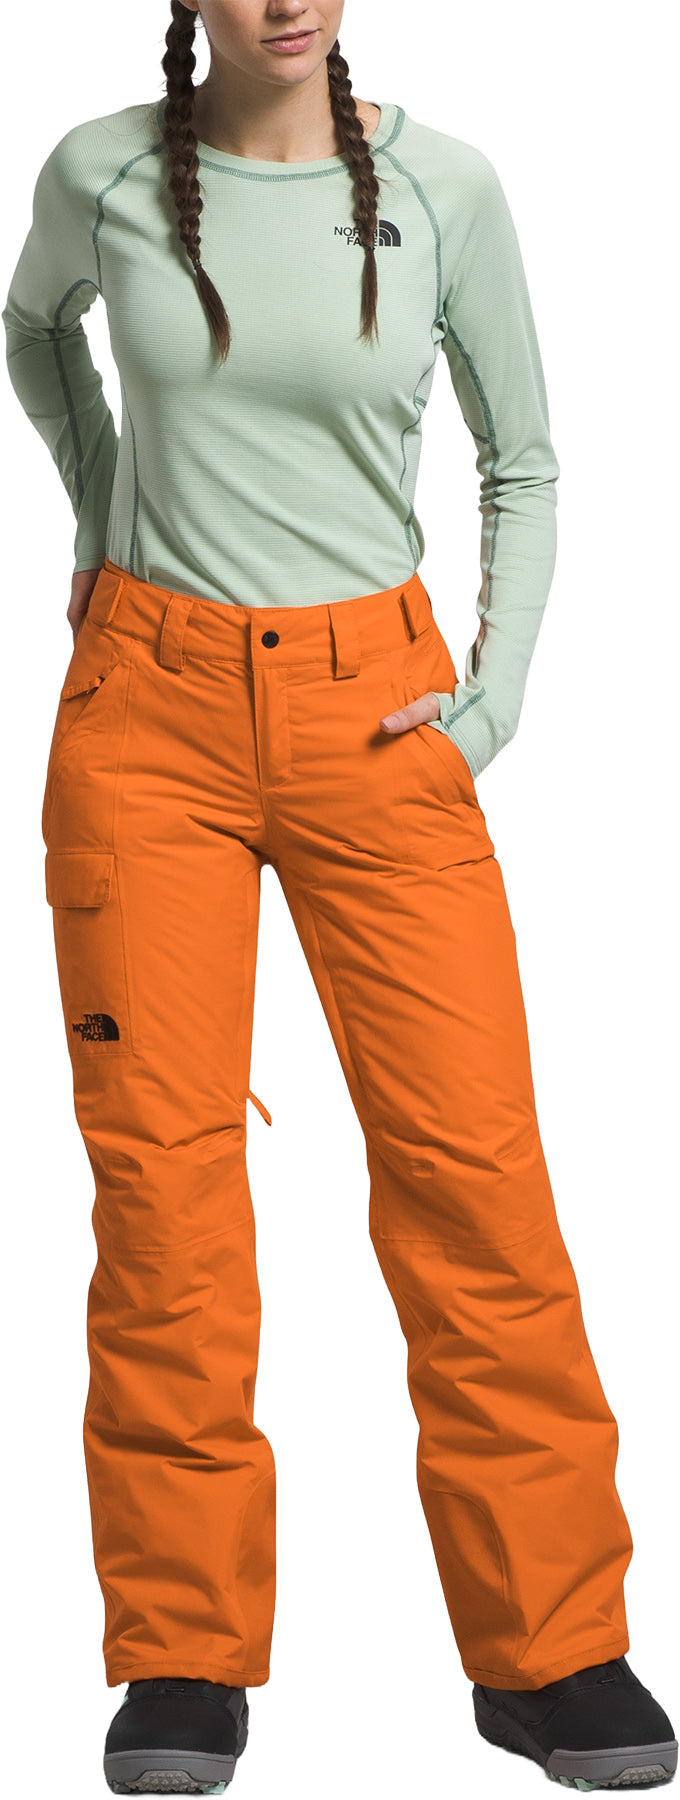 Pulse Statement Insulated Snowboard Pant (Women's)